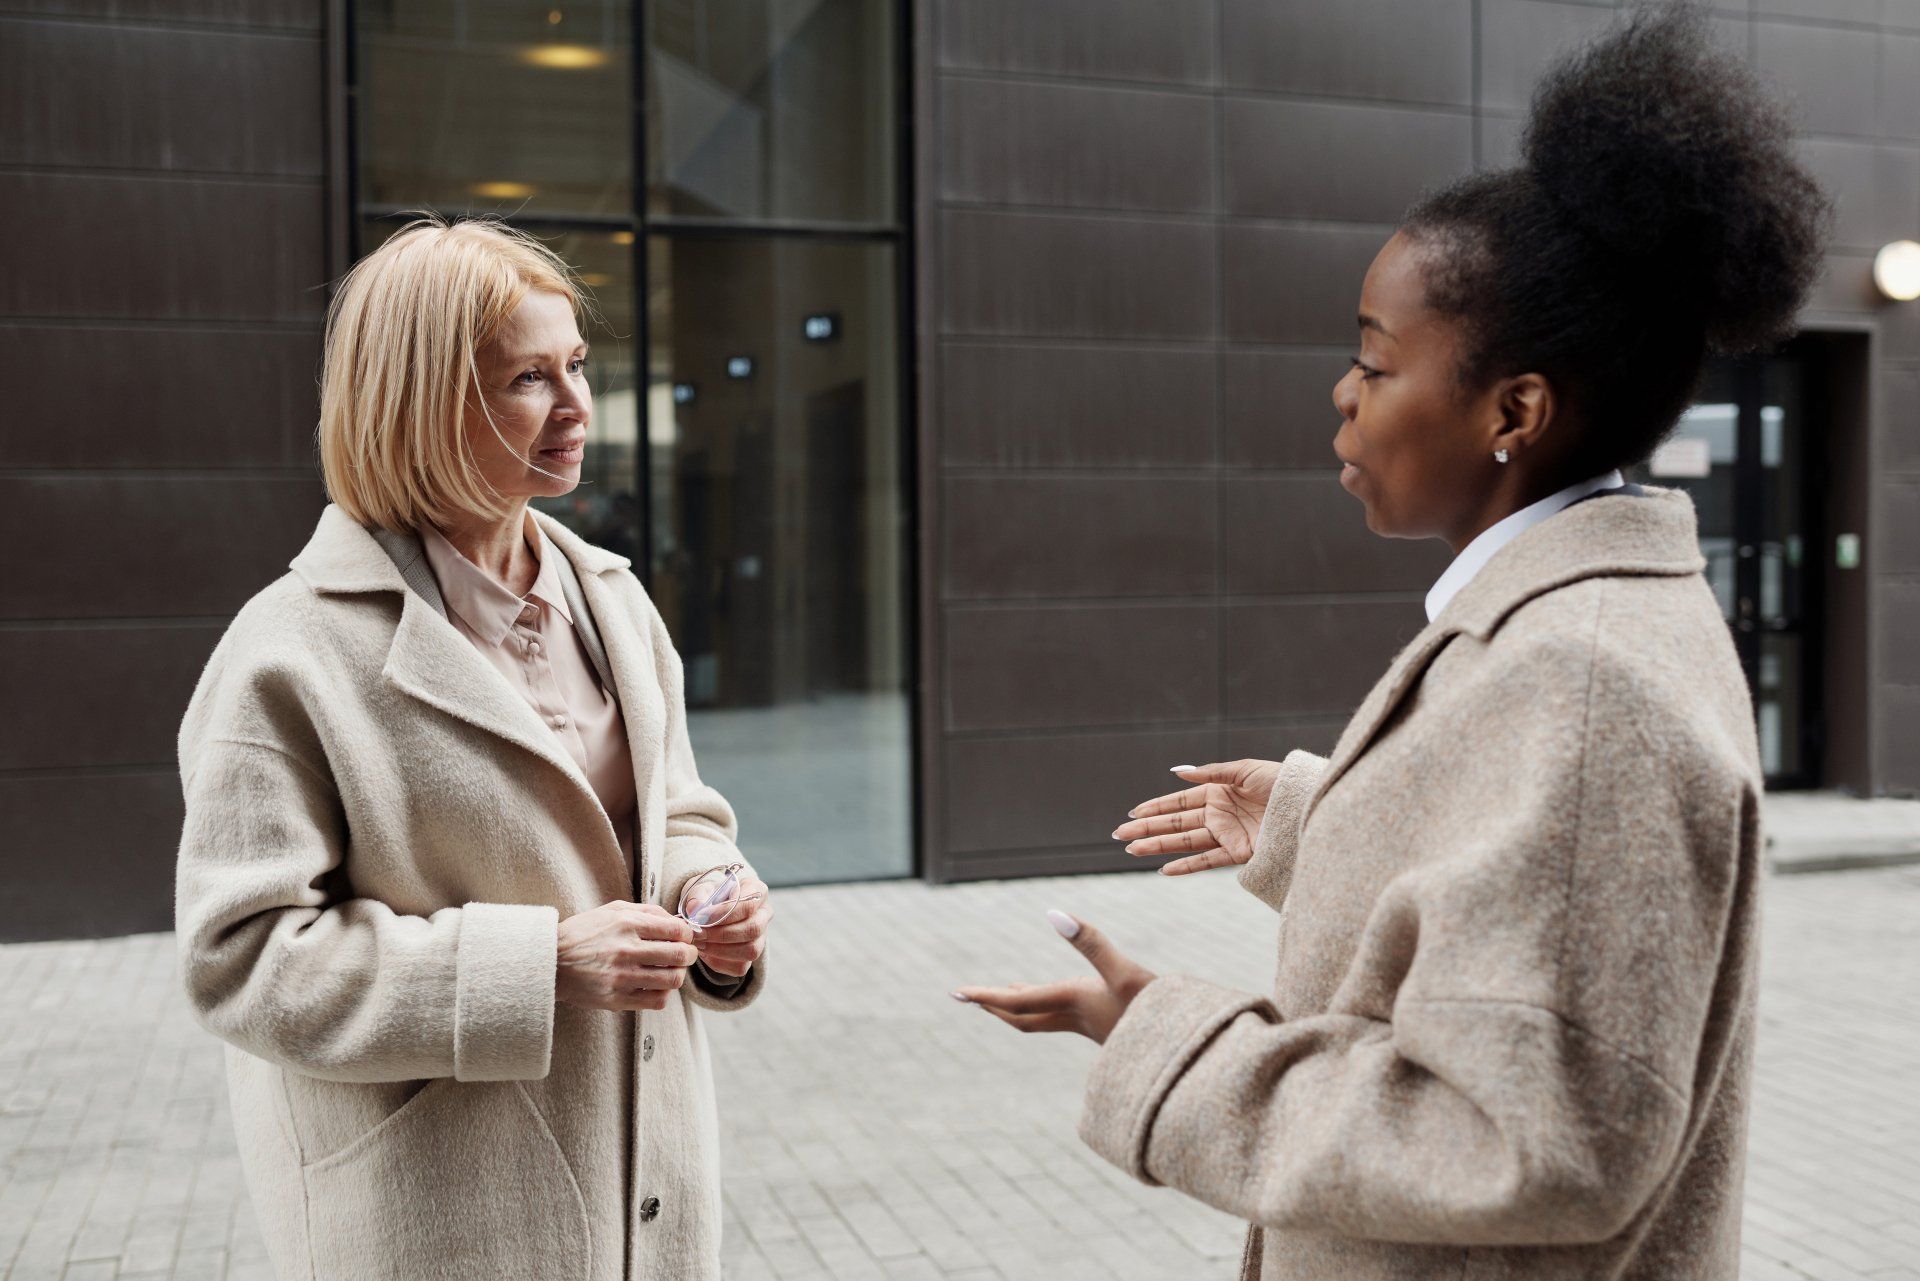 Two women are talking to each other in front of a building.